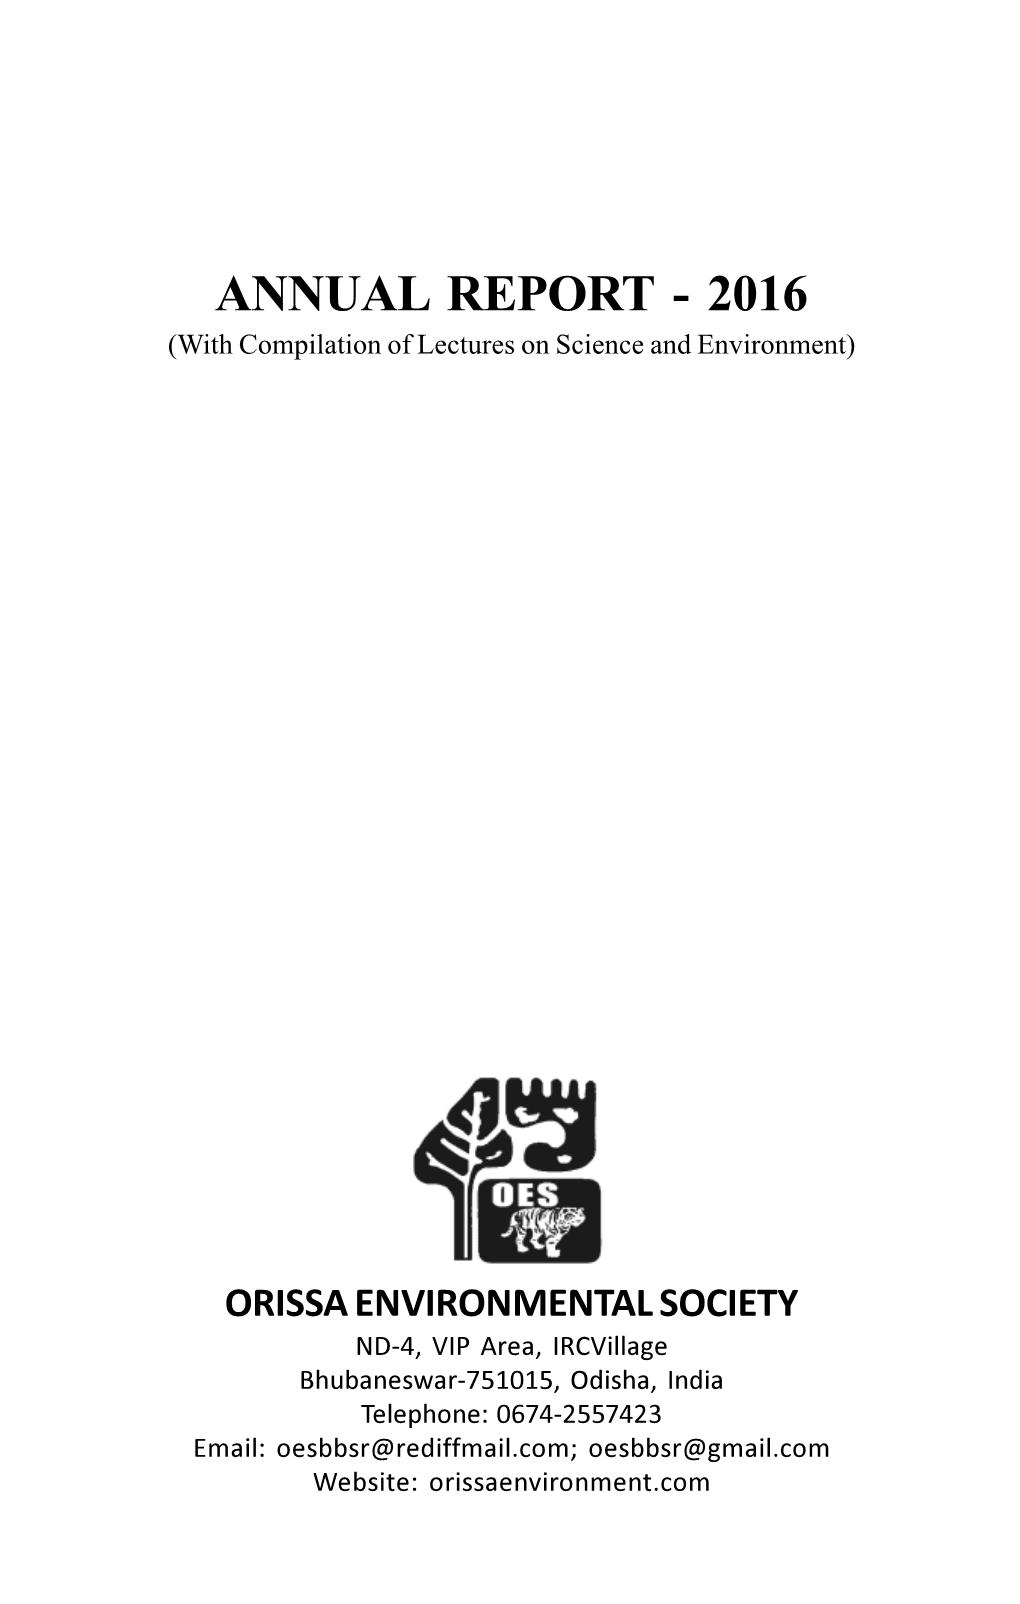 OES Annual Report 2016.Pmd